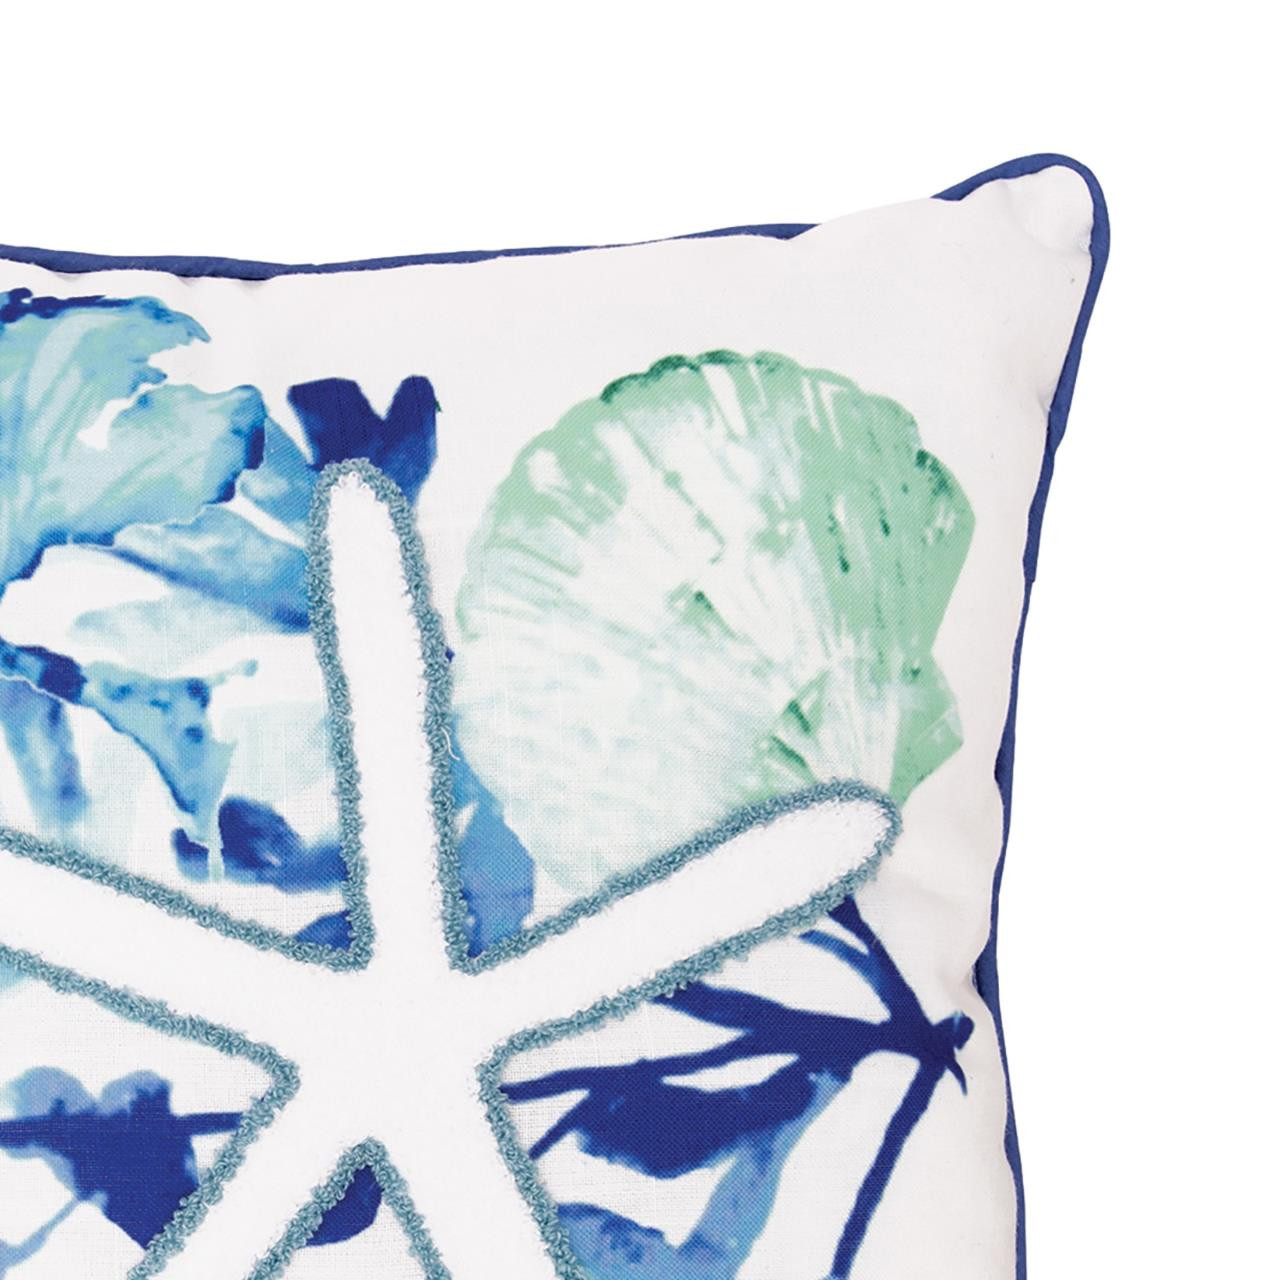 Bluewater Bay Pillow - 008246824336